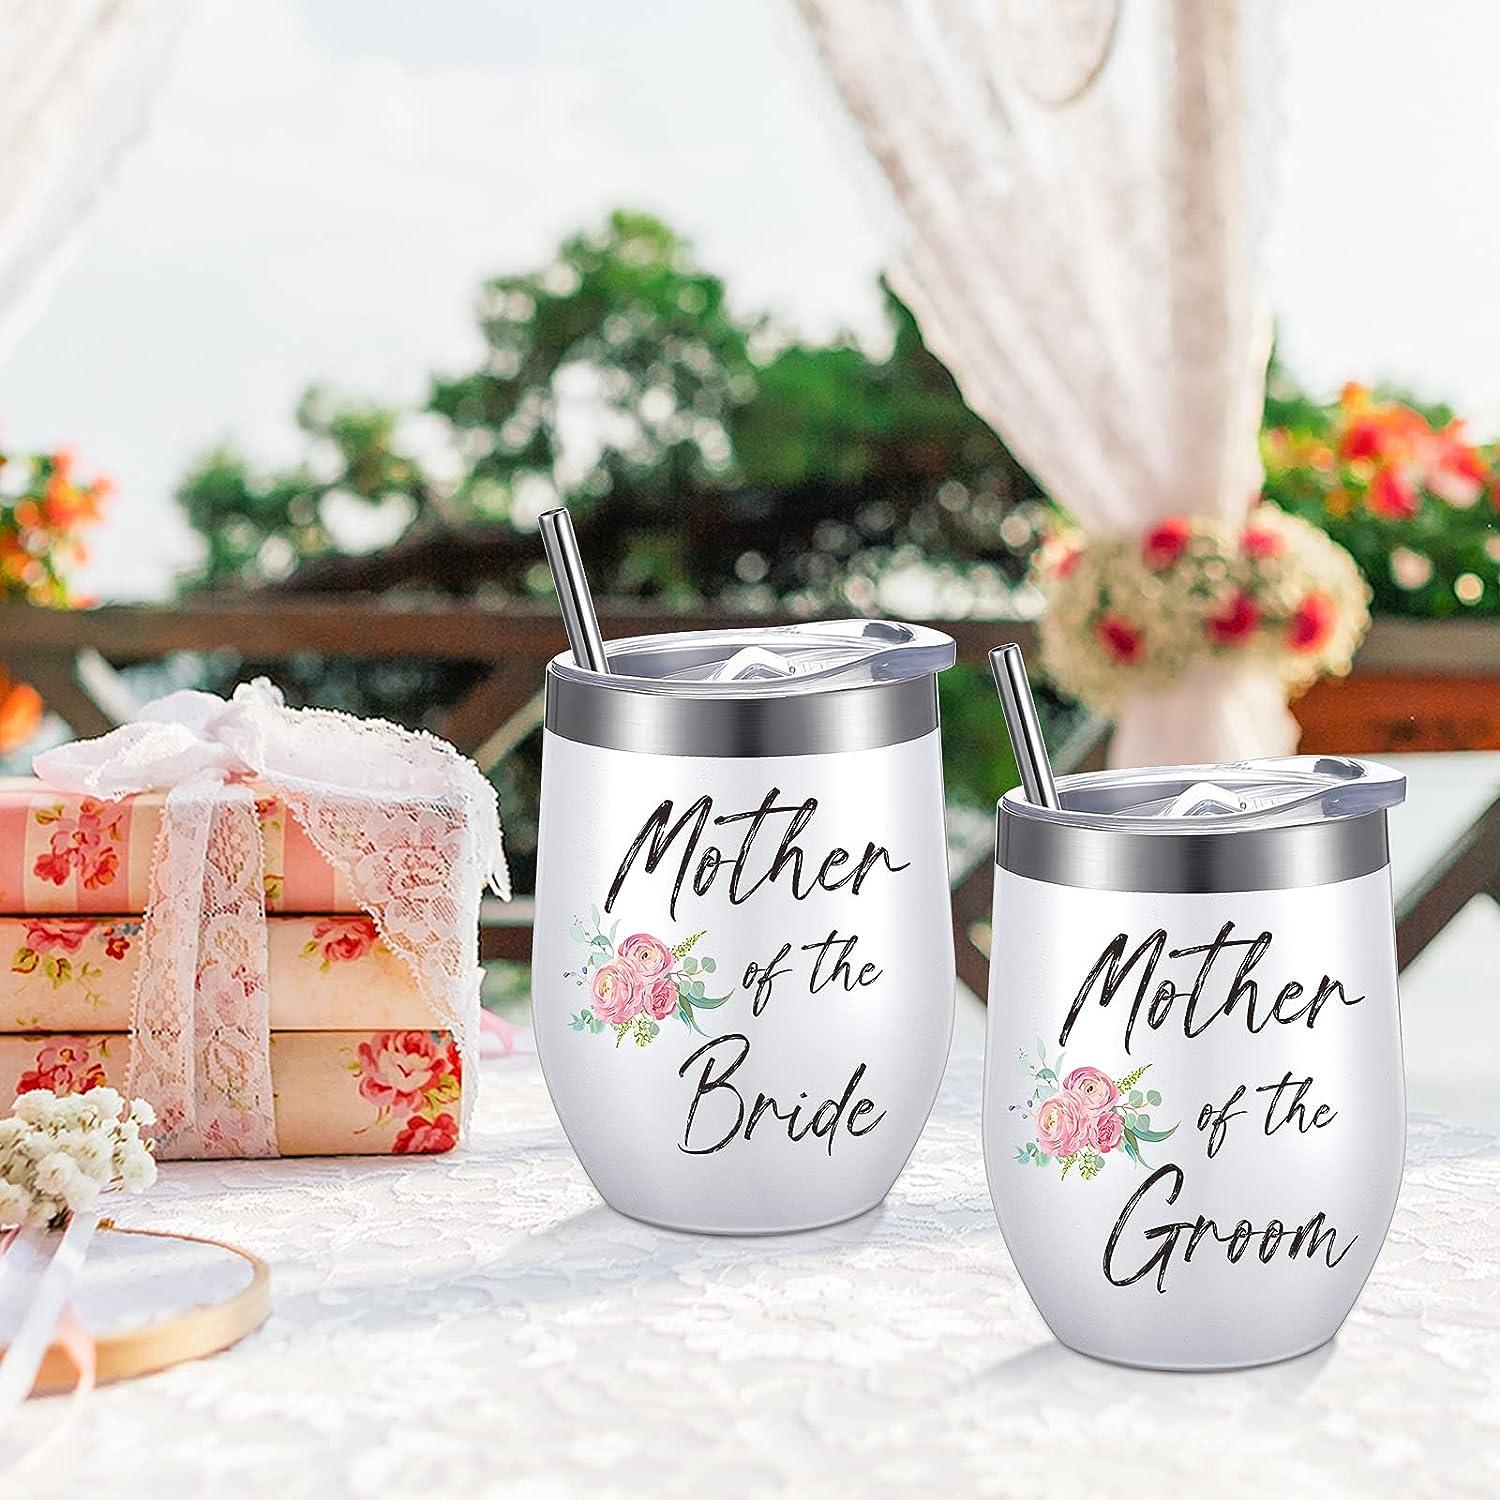 10 Unique Wedding Gifts the Bride and Groom will Love and Use - Tips from a  Typical Mom | Thoughtful wedding gifts, Unique wedding gifts, Wedding  shower gifts